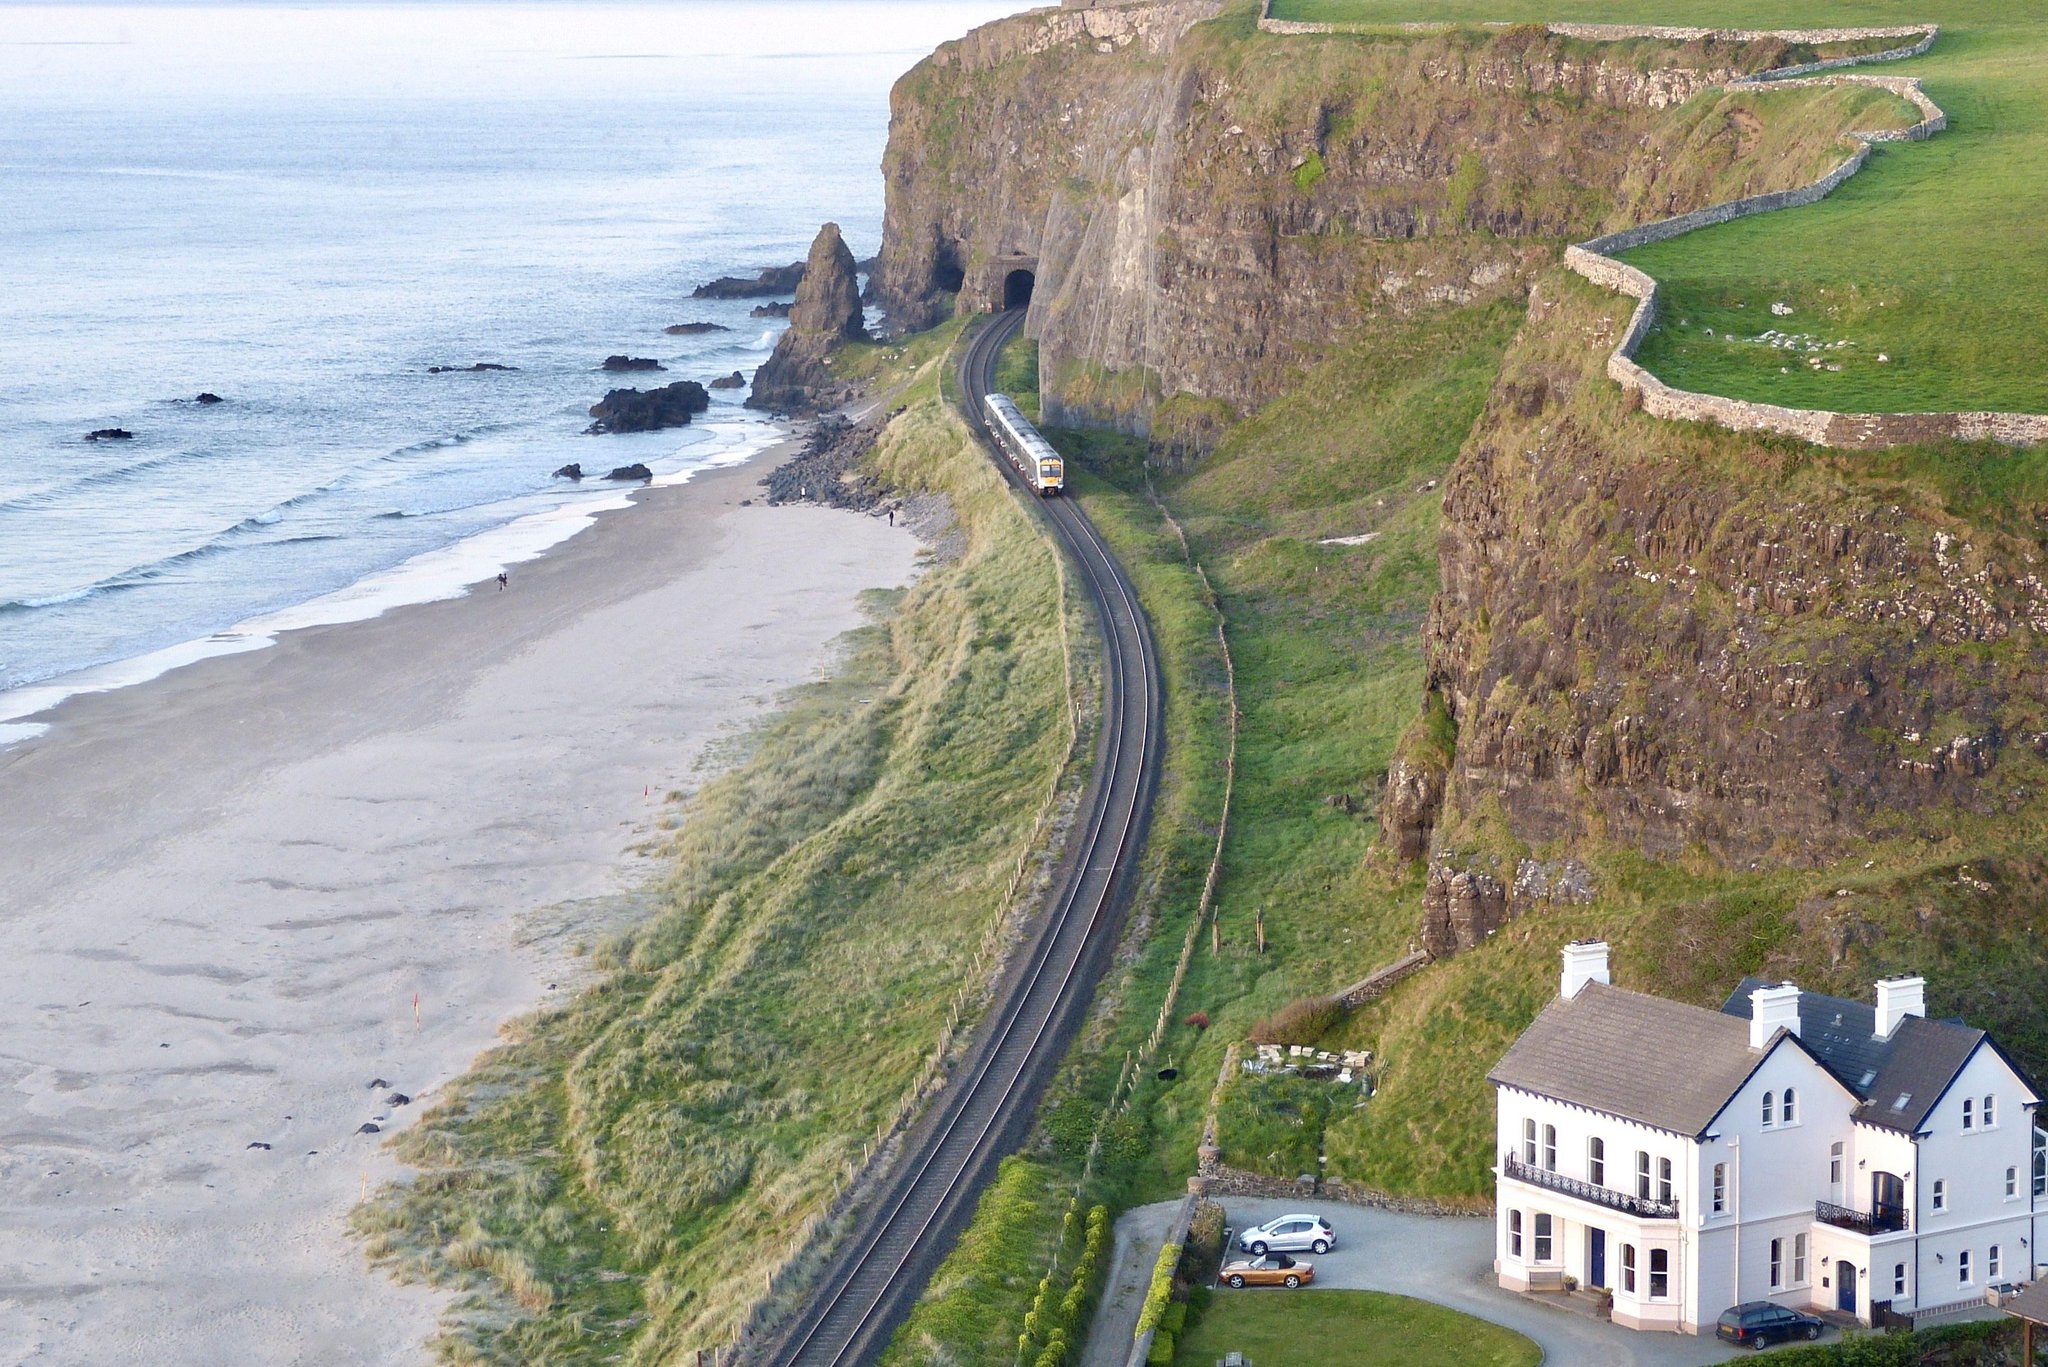 New TV series 'B&B By The Sea': Celebrities come to Northern Ireland for guesthouse experience